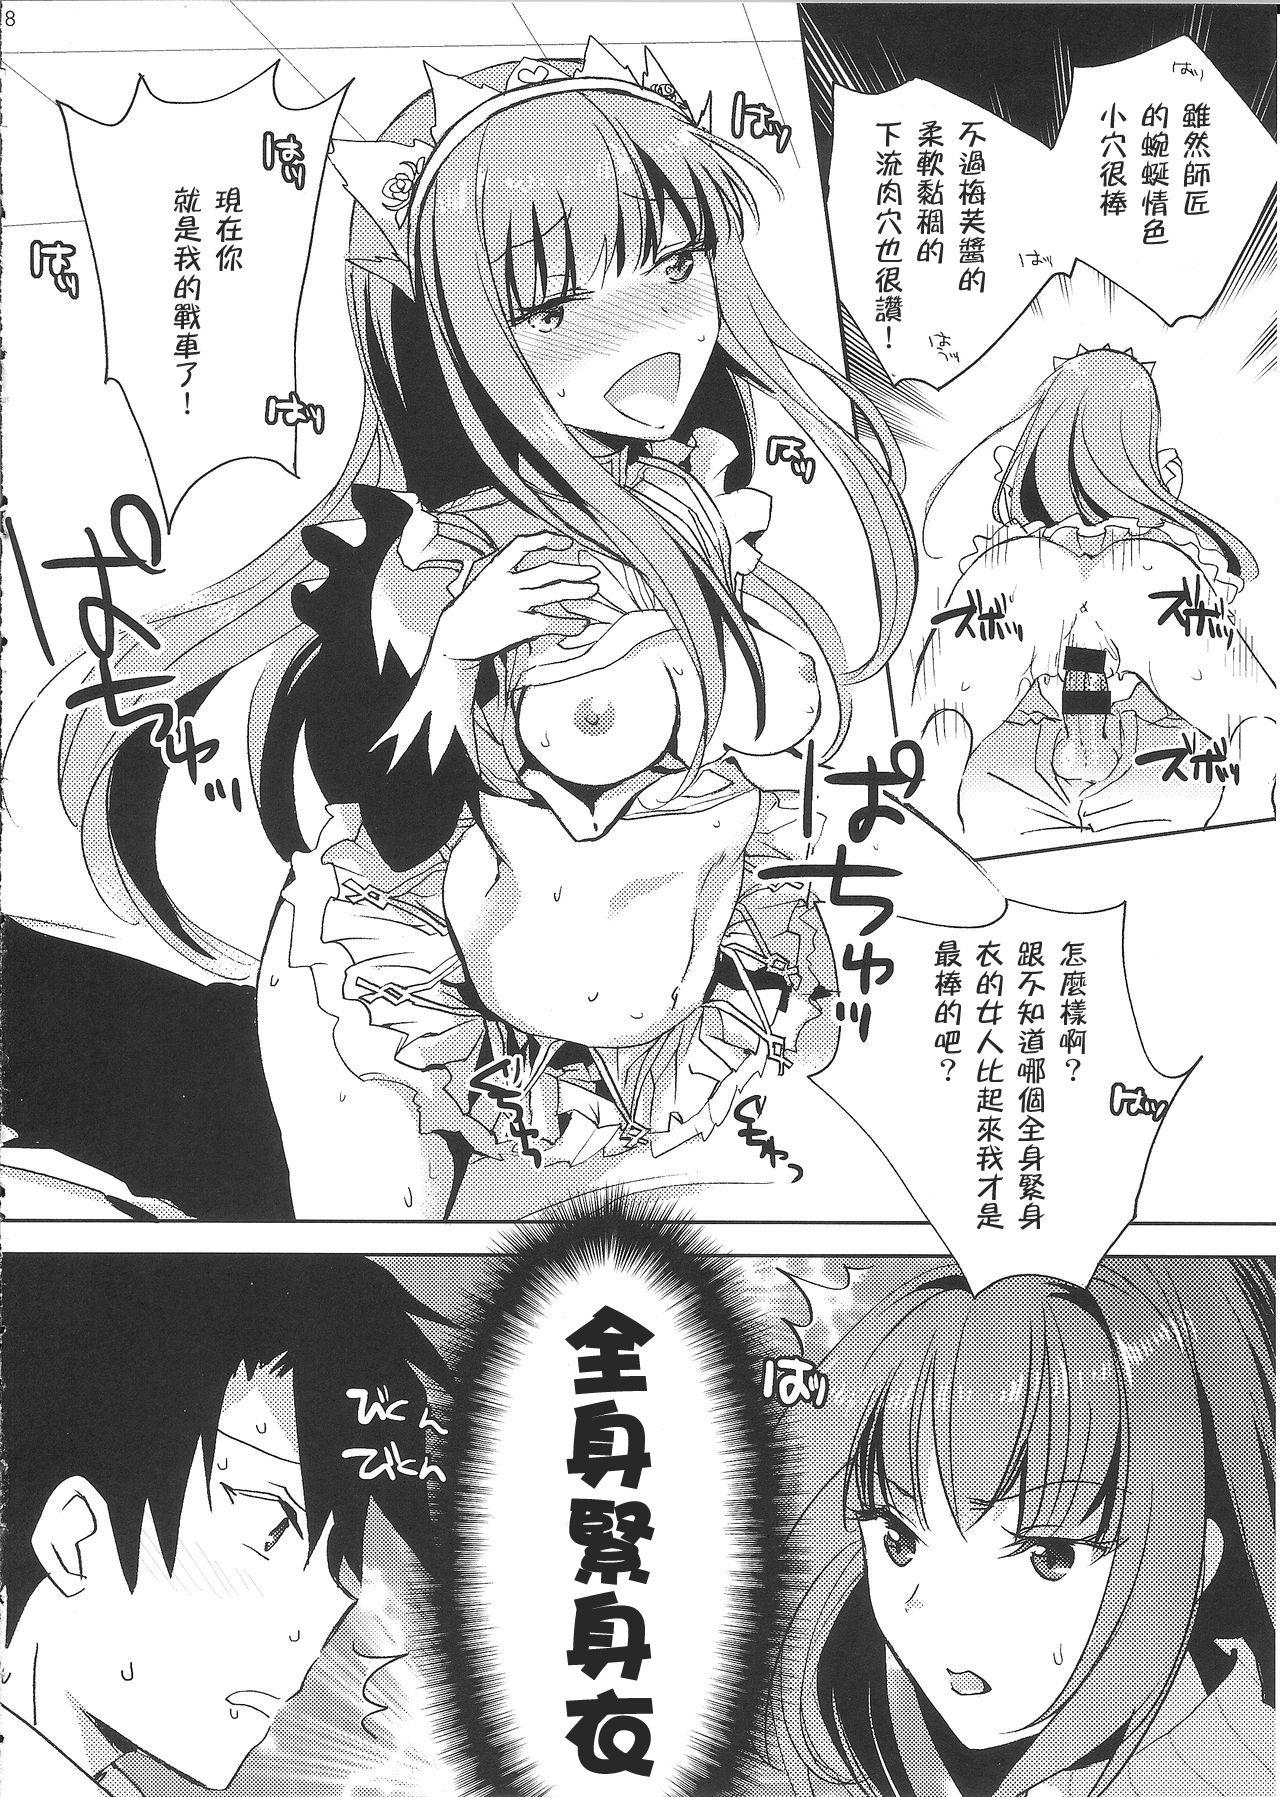 Abg BLACK EDITION 2 - Fate grand order Sex - Page 6